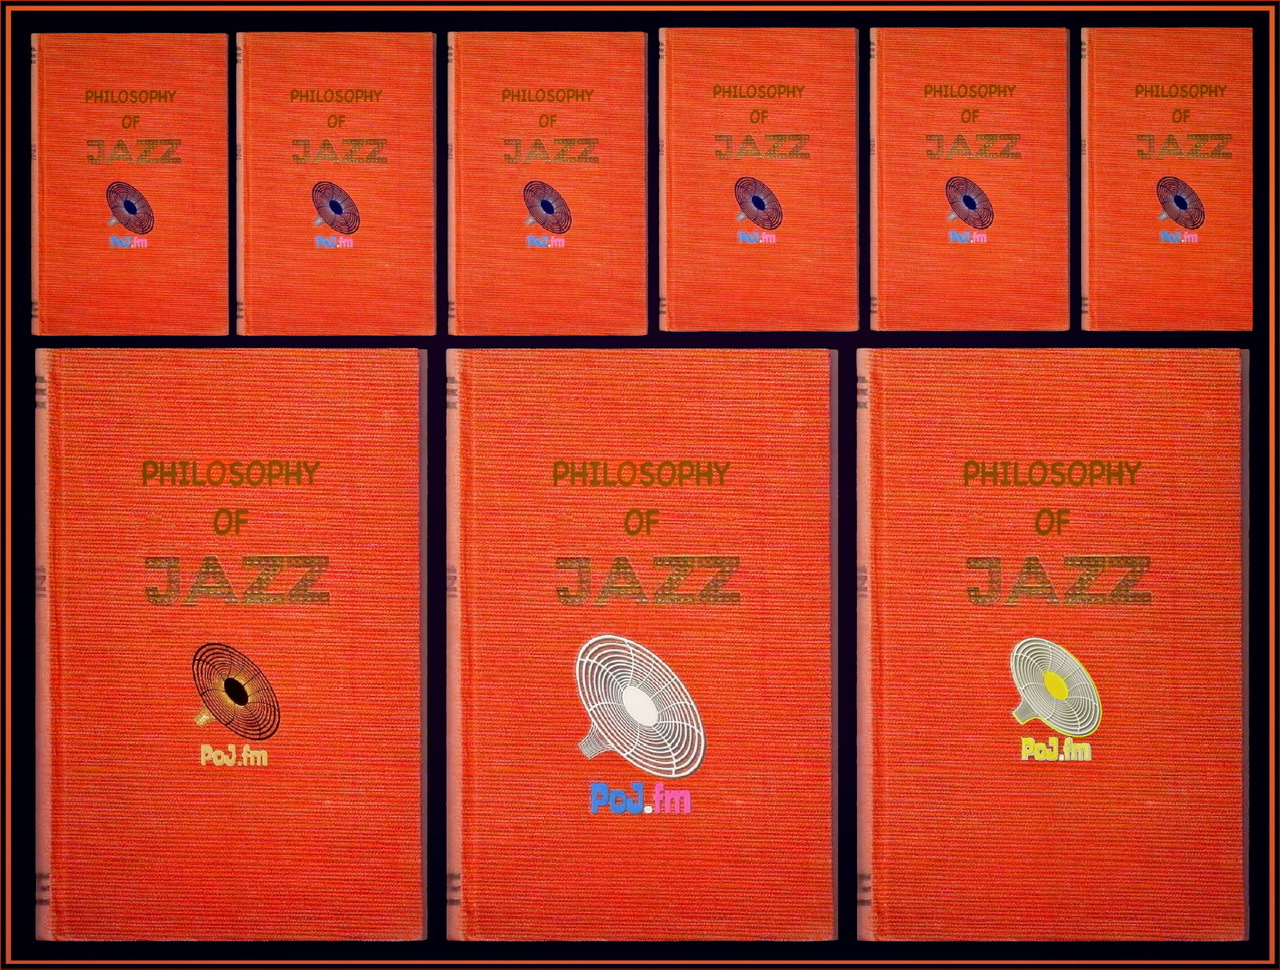 A framed graphic of the same orange thin horizontal lines textured book cover with the title centered on the cover of "Philosophy of Jazz" with different colored PoJ.fm logos centered underneath with six book covers on the top and three larger ones on the bottom.